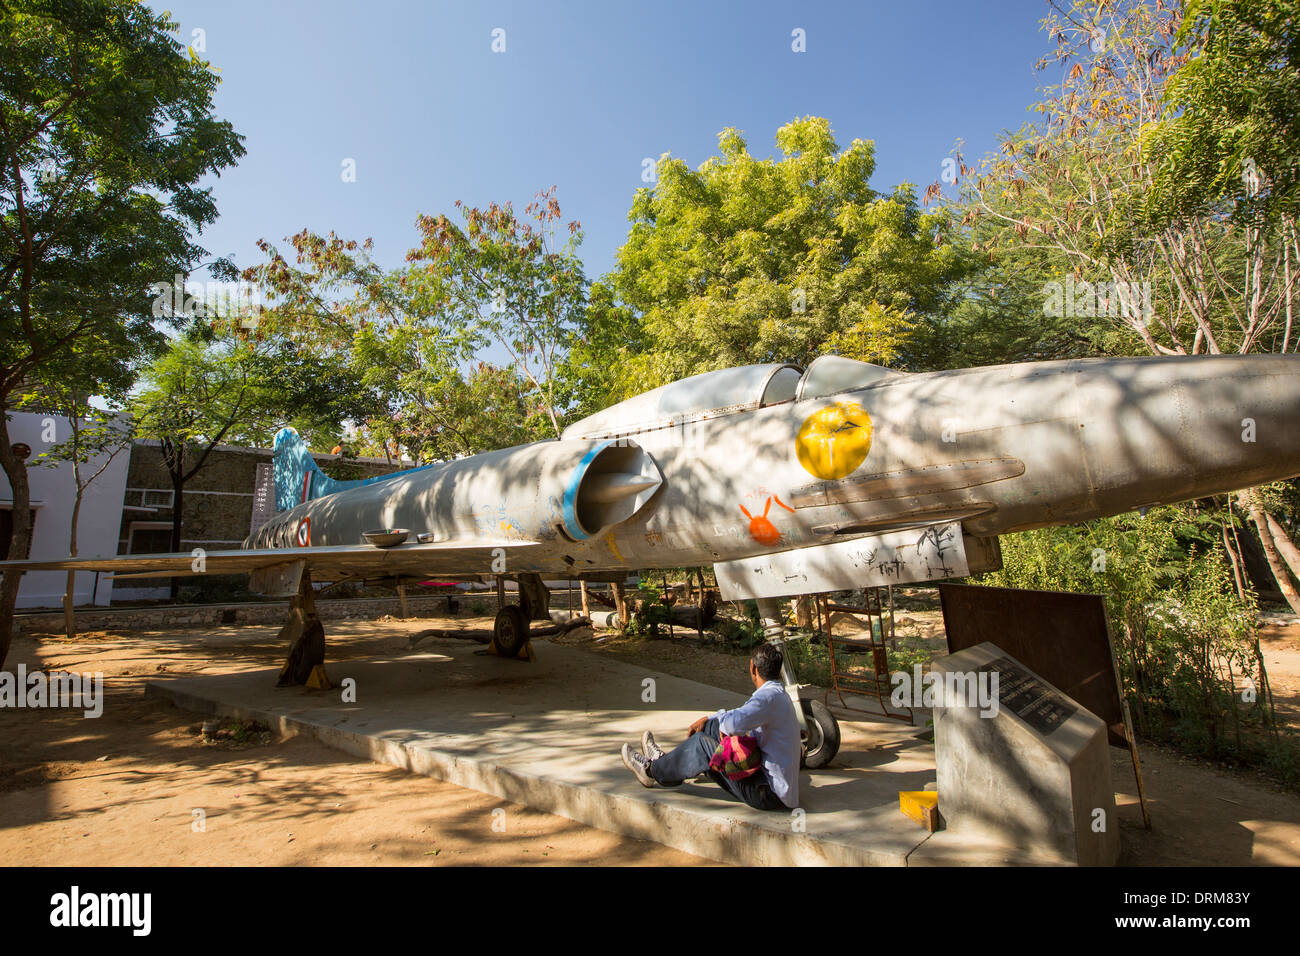 An Indian airforce jet donated to the Barefoot College in Tilonia, Rajasthan, India. Stock Photo